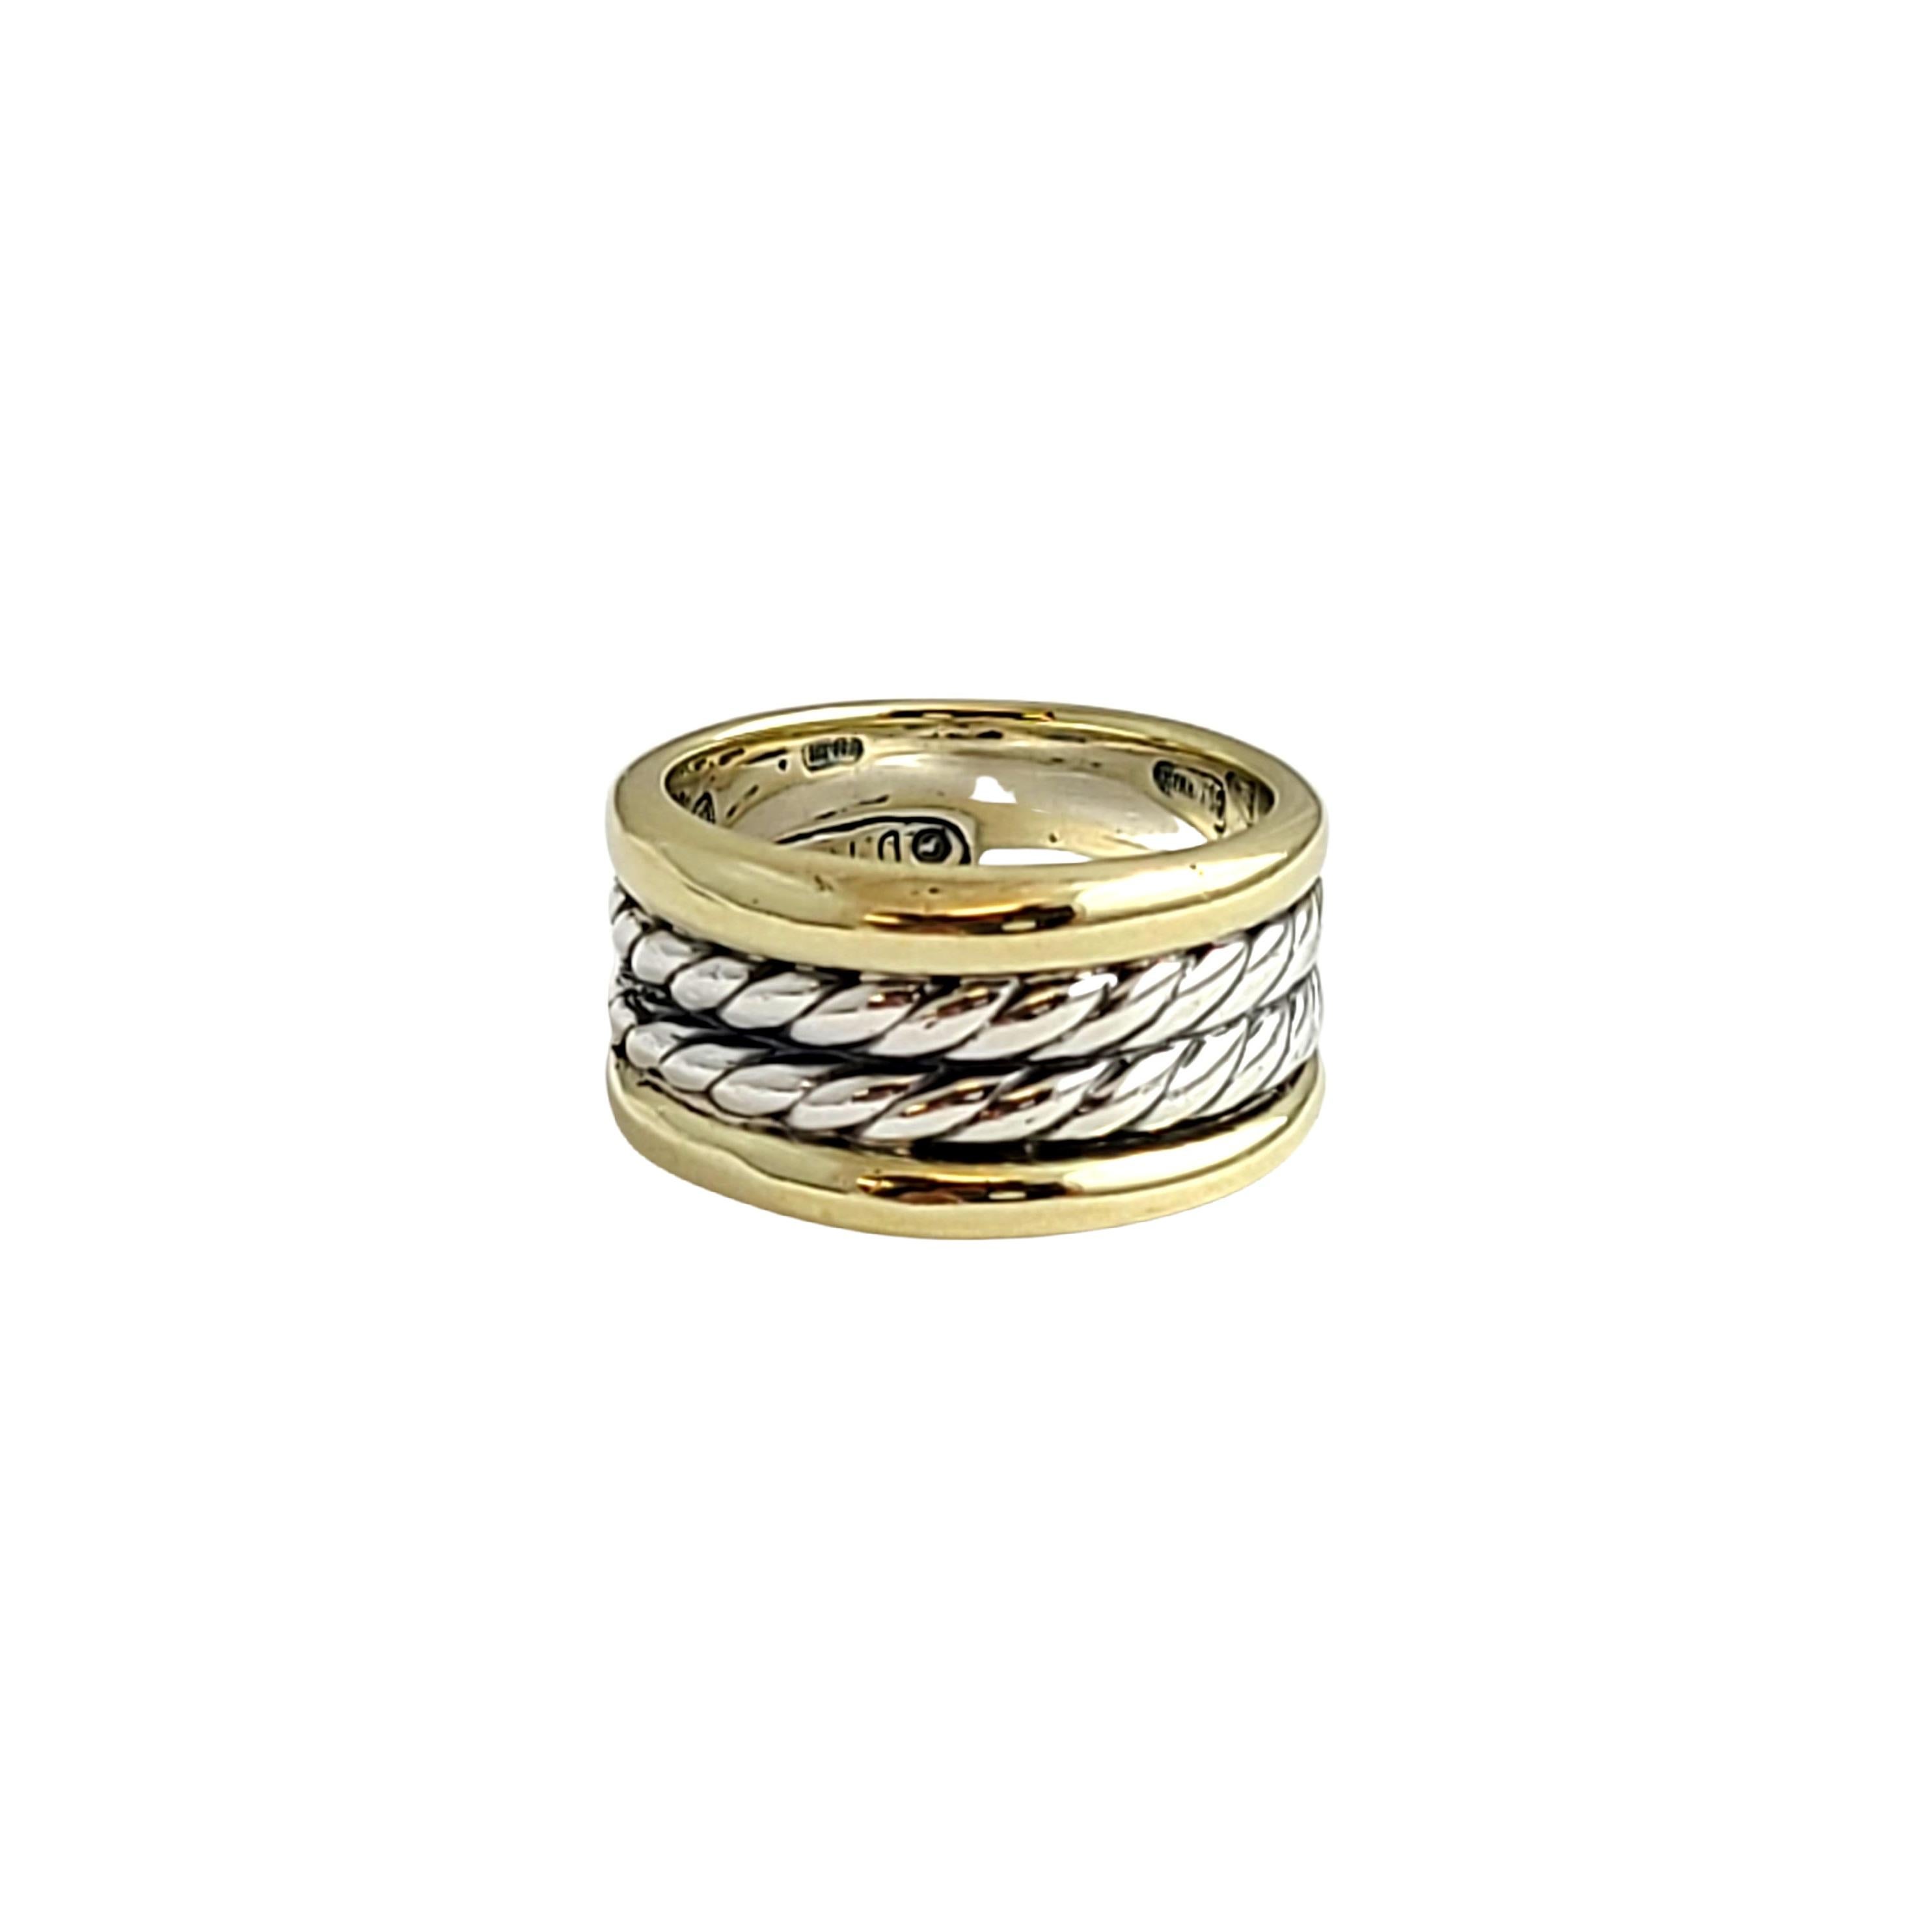 Sterling silver and 14K yellow gold Double Cable Row Origami band ring by David Yurman

Size 6.25

This band is by David Yurman, it features 2 rows of sterling silver cables with 14K yellow gold accent edges.

Measures approx 3/8